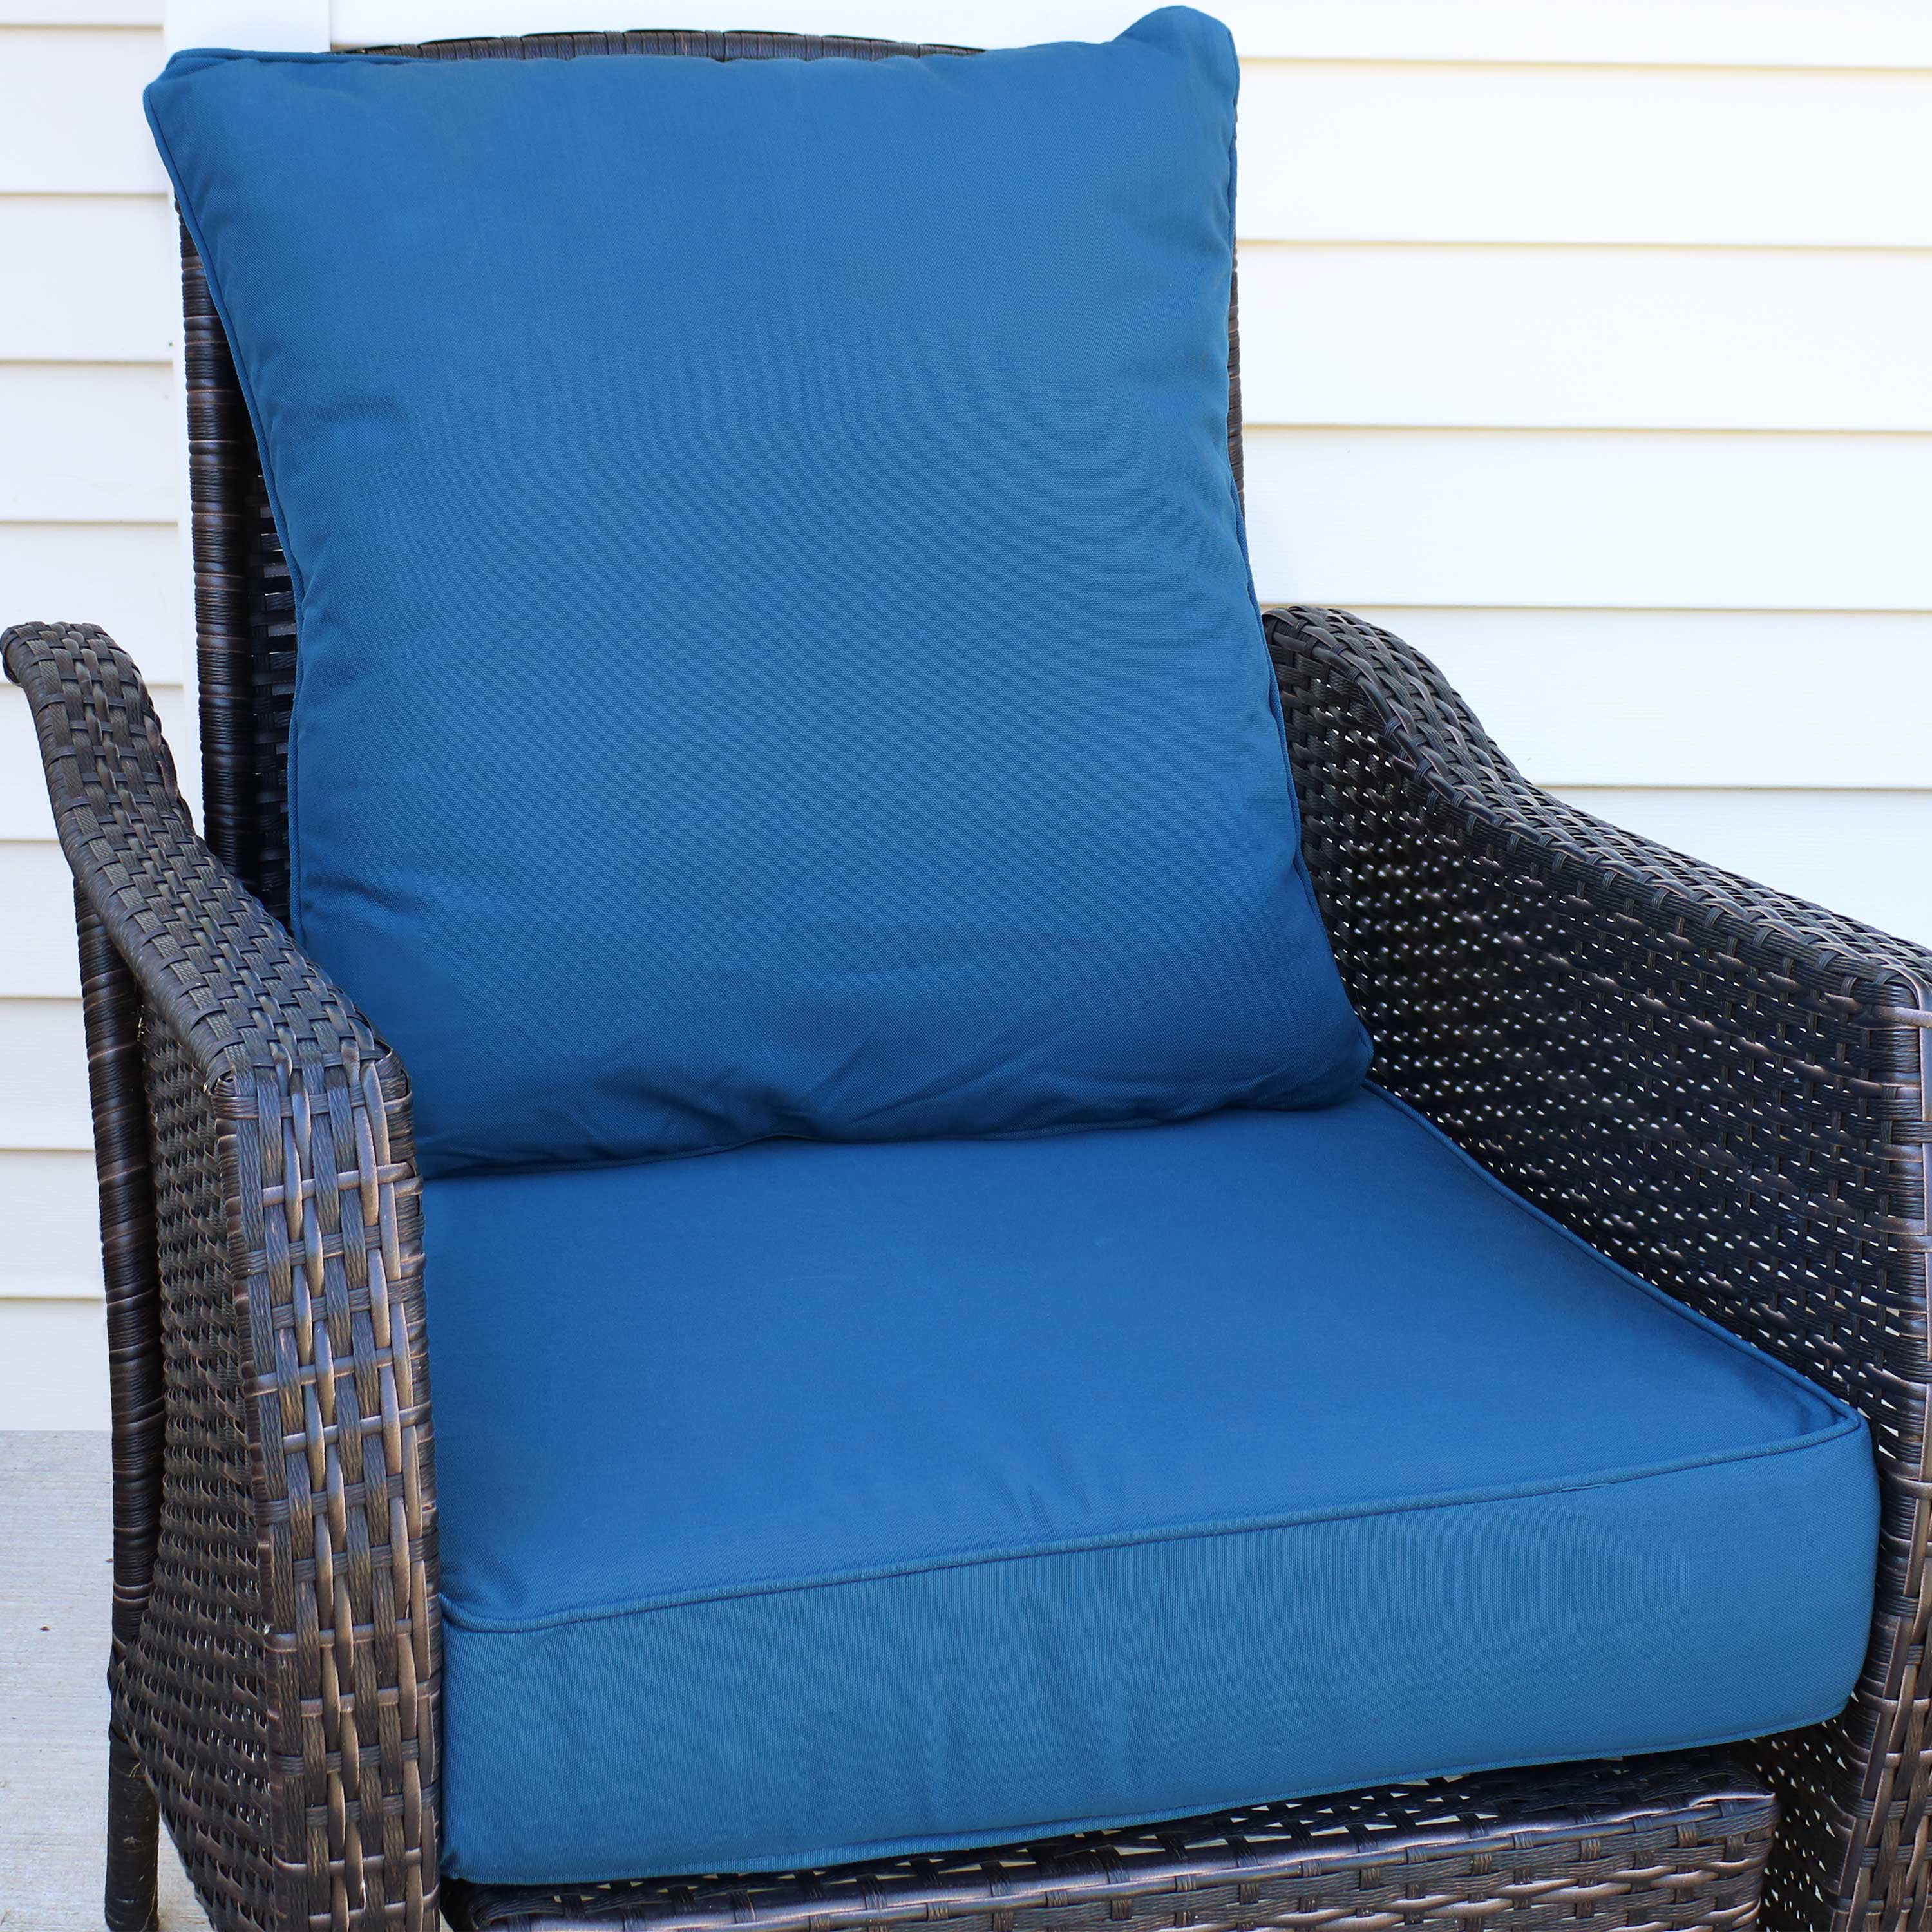 Sunnydaze Back And Seat Cushion Set For Indoor Outdoor Furniture 2 Piece Replacement Cushions Deep Seating Patio Chair Outside Pads Porch Deck Garden Seats Blue Com - Deep Seating Outdoor Furniture Replacement Cushions